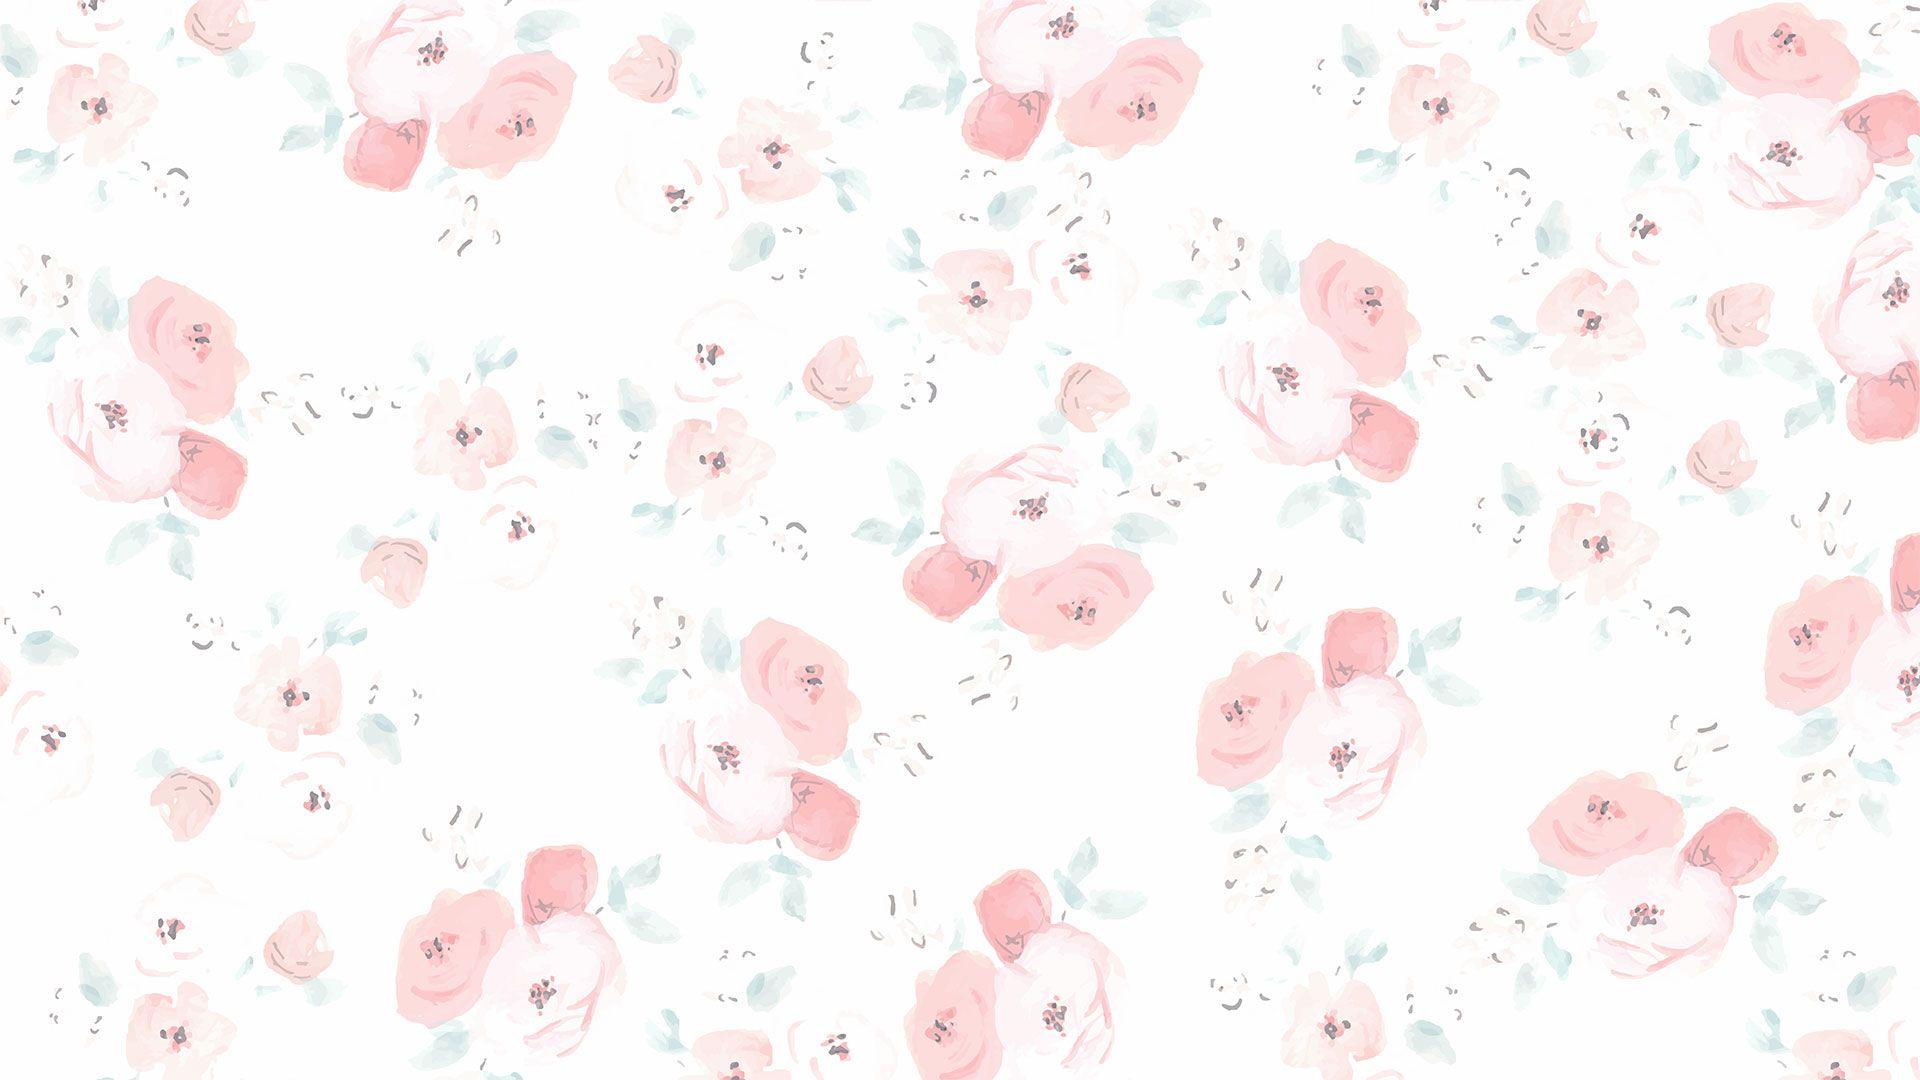 Faded Floral Watercolor Wallpaper 1920x1080